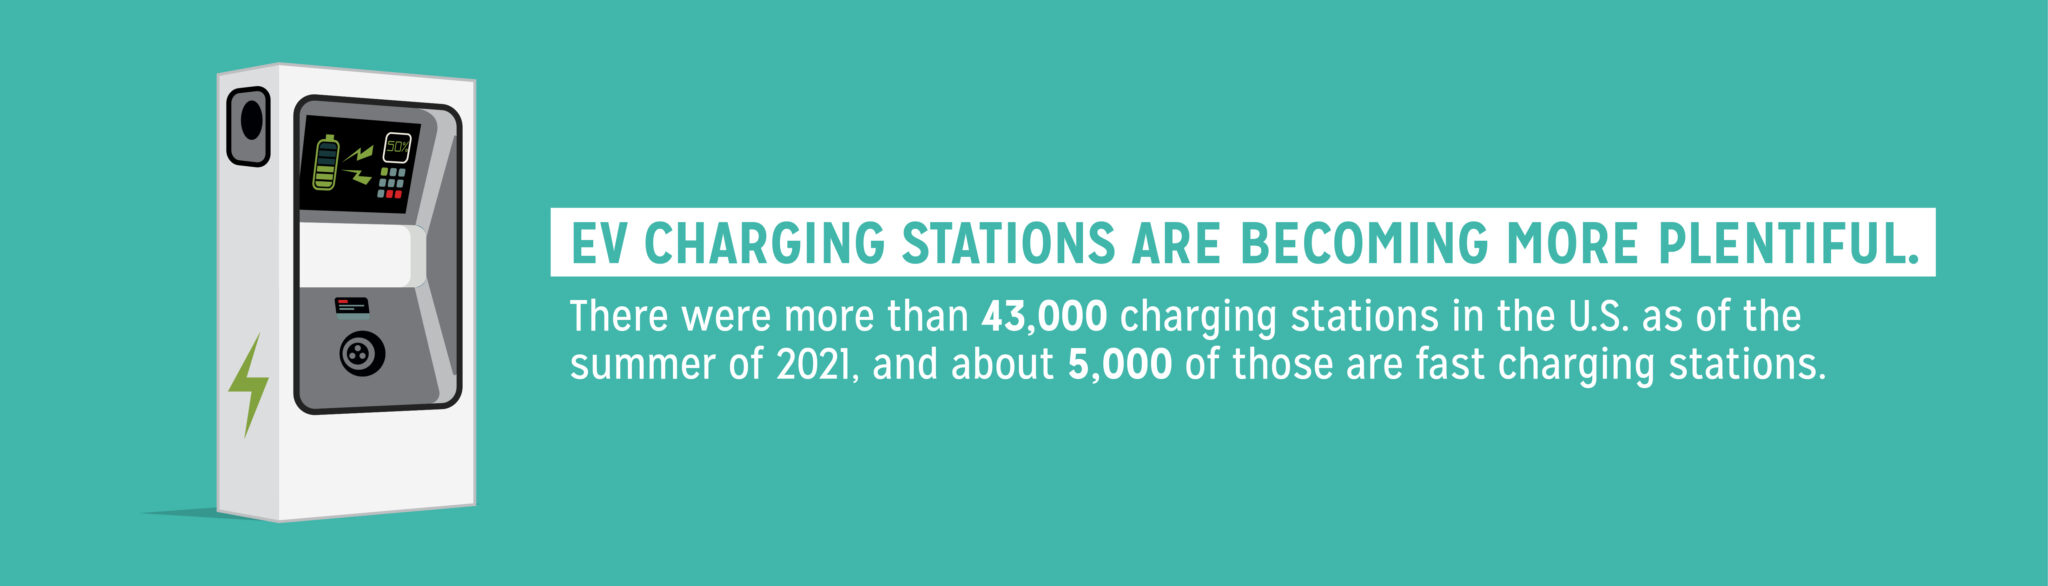 Infographic showing that there are more than 43,000 charging stations in the US as of summer 2021